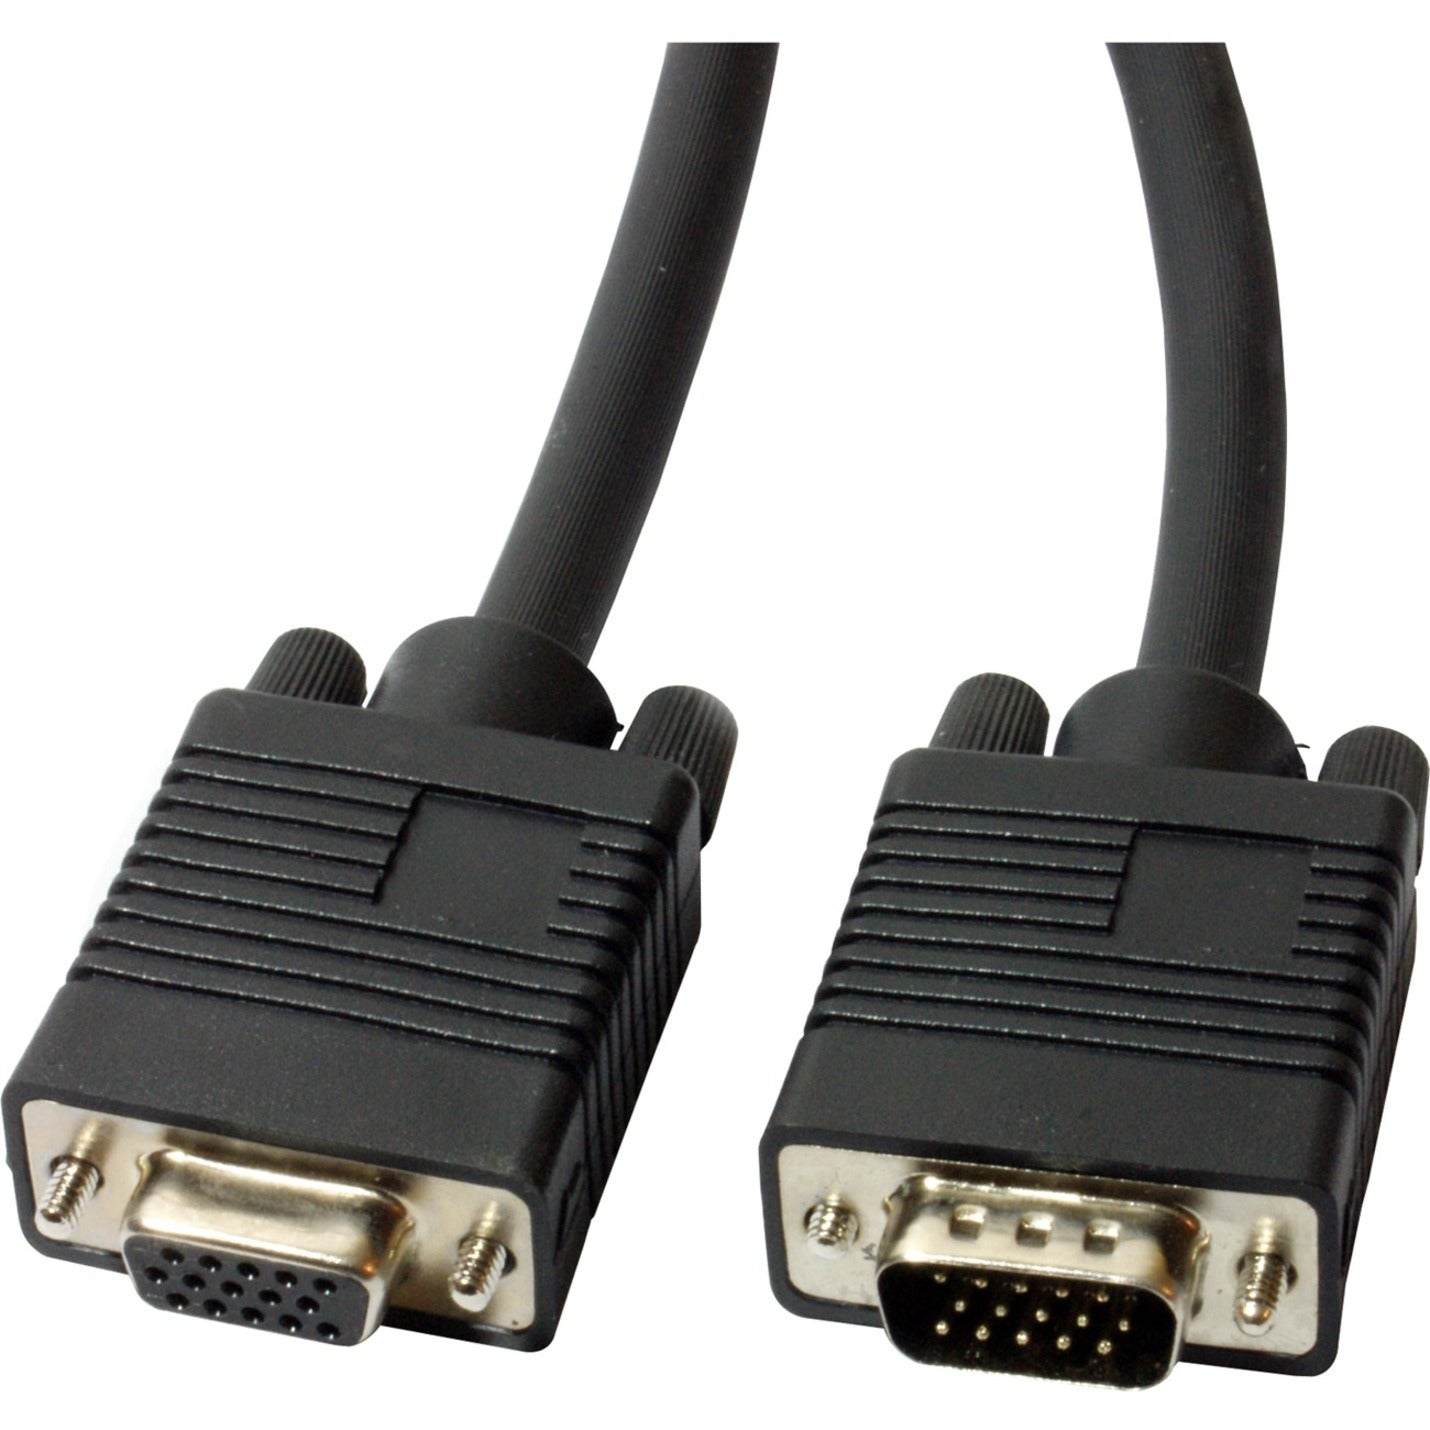 4XEM 4XVGAMF6FT VGA Extension Cable, 6ft High Resolution Coax M/F